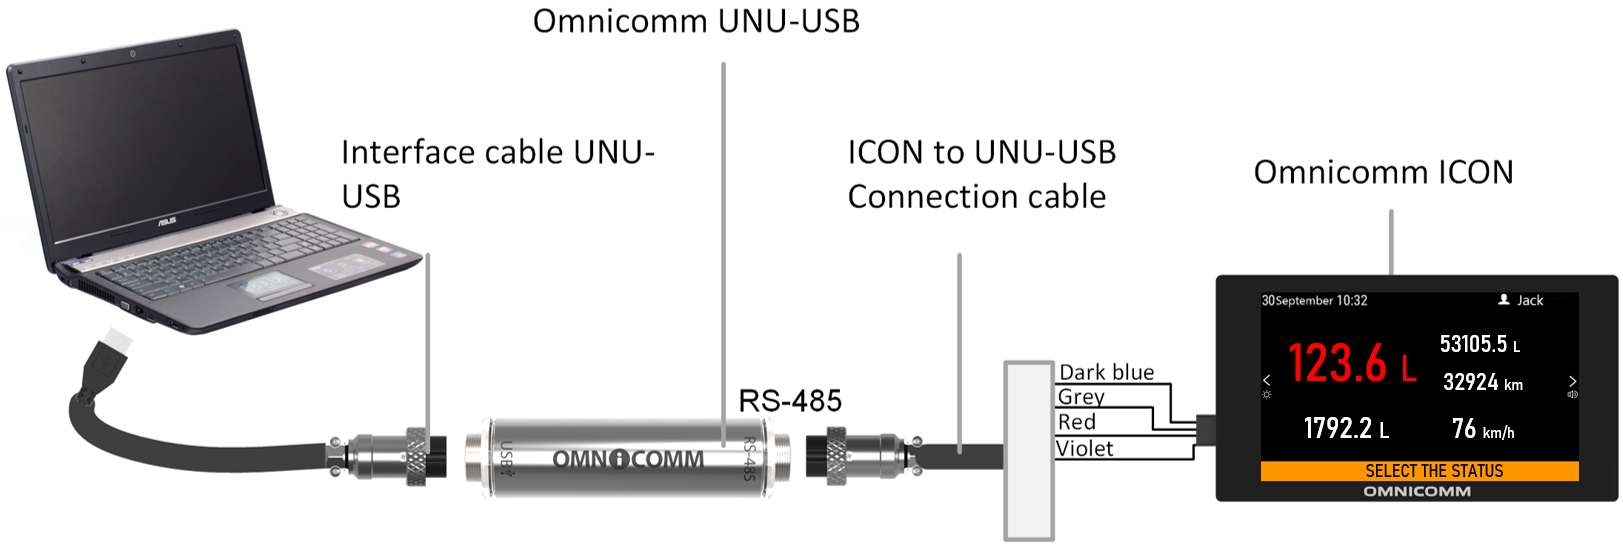  The Omnicomm ICON connection diagram to a PC 